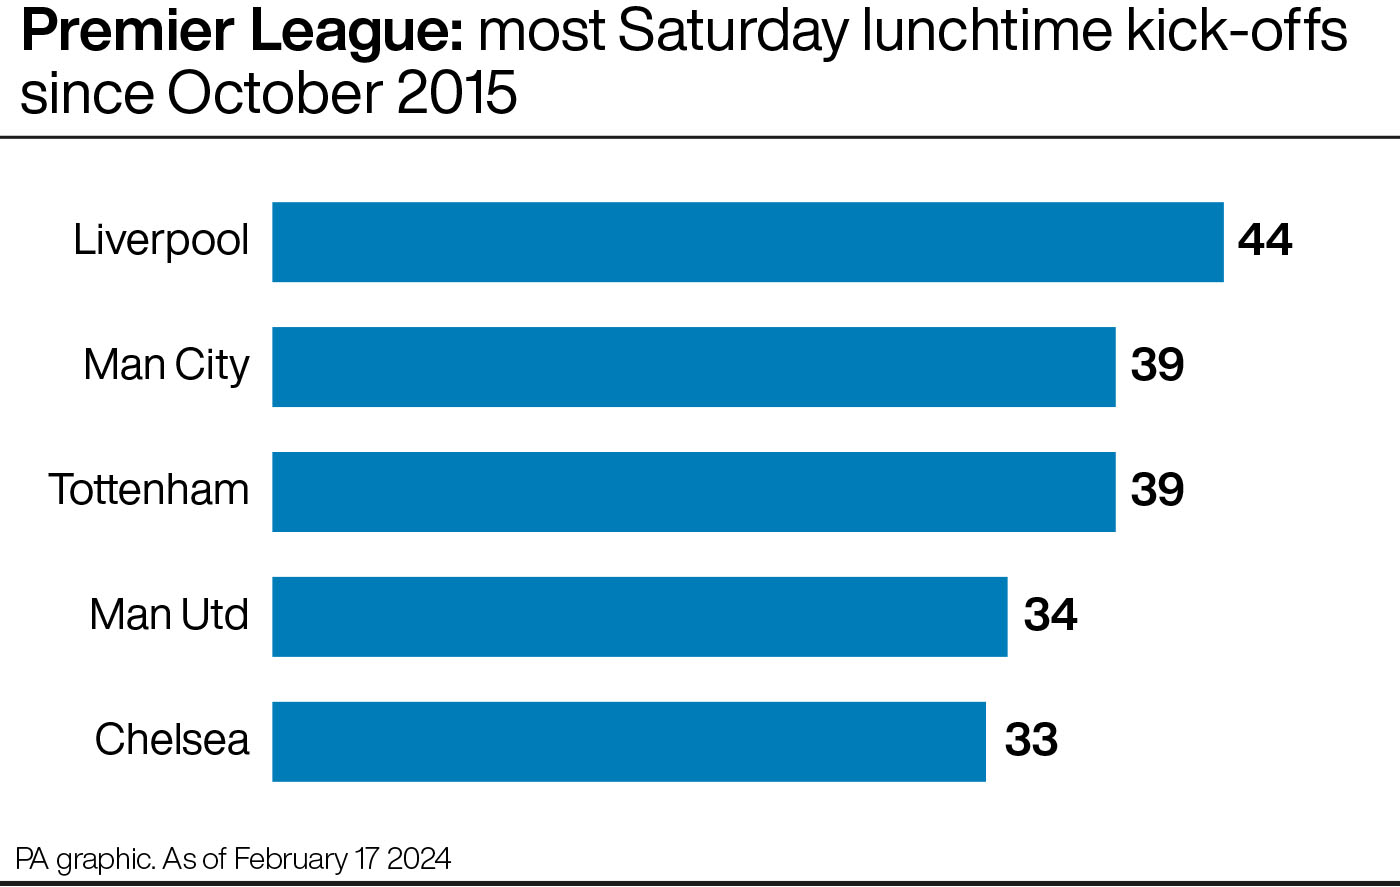 Graphic showing Premier League teams with the most Saturday lunchtime kick-offs since Jurgen Klopp's appointment: Liverpool 44, Manchester City and Tottenham 39, Manchester United 34, Chelsea 33